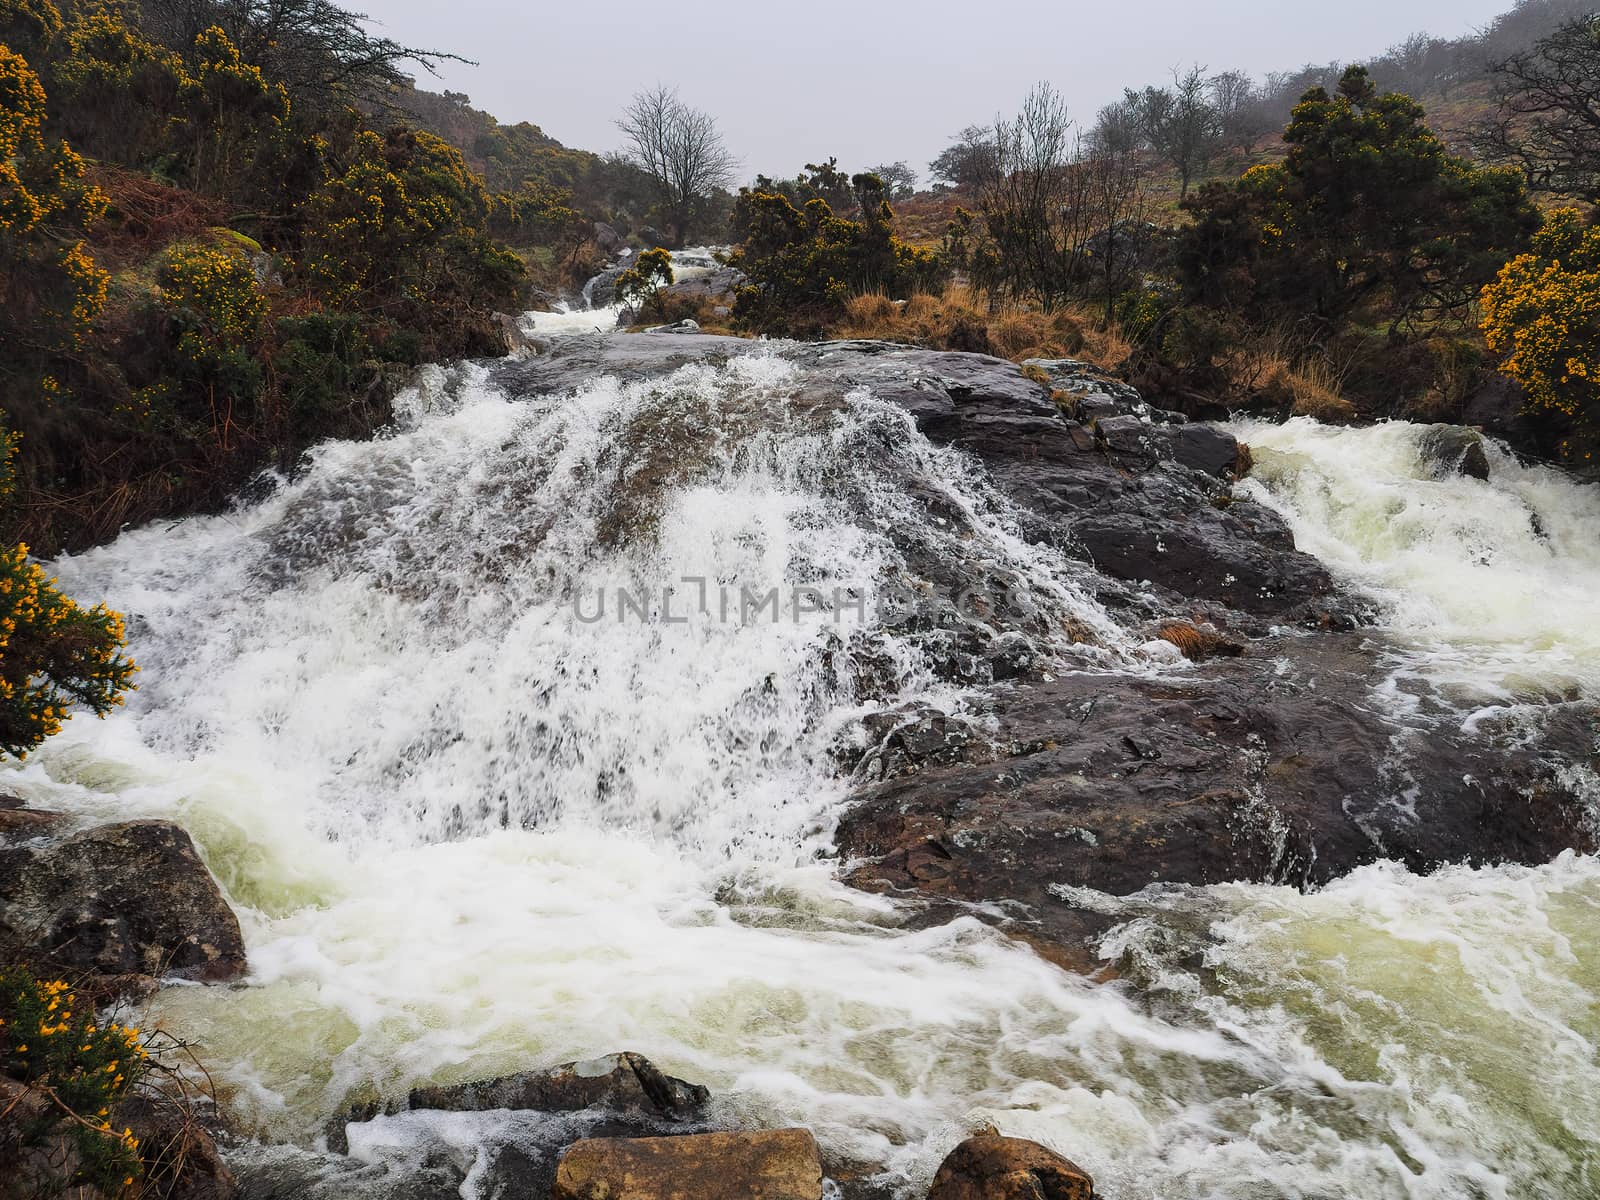 Water cascading over rocks through the valley of Red-a-ven Brook with yellow gorse coming into bloom, Dartmoor National Park, Devon, UK